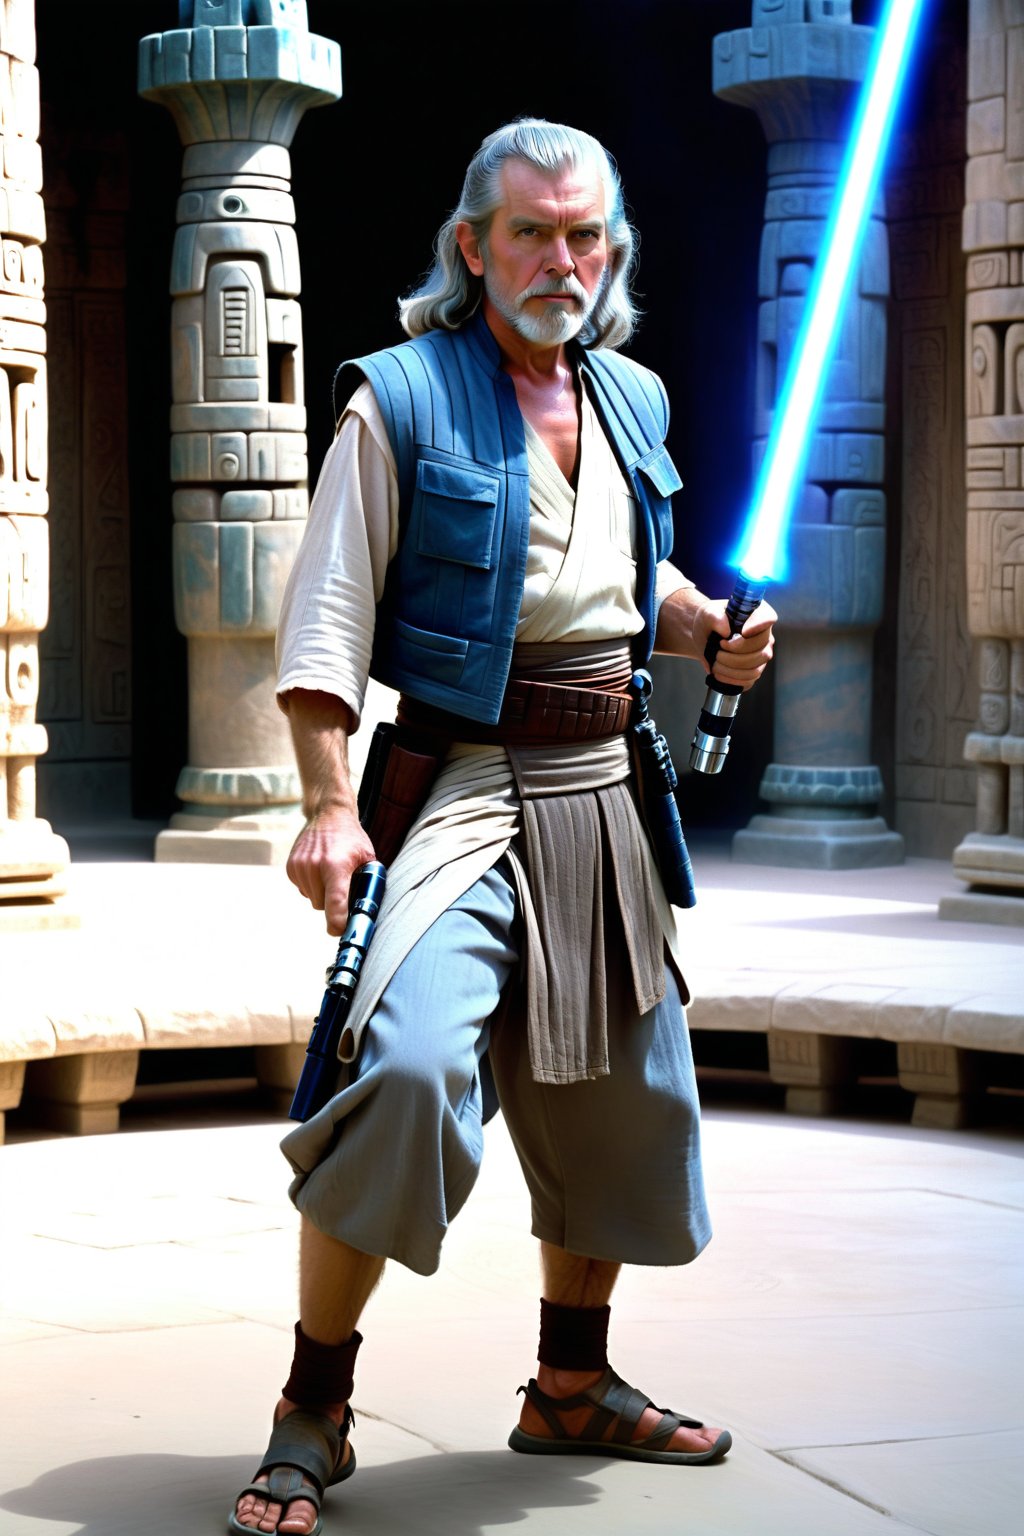 A scene from Star Wars.
A full body portrayal.
A man with long grey hair and a short beard in the courtyard of a Mayan-style temple.
He is dressed in light three-quarter trousers, a vest and light shoes.
He wields a lightsaber with a blue blade.